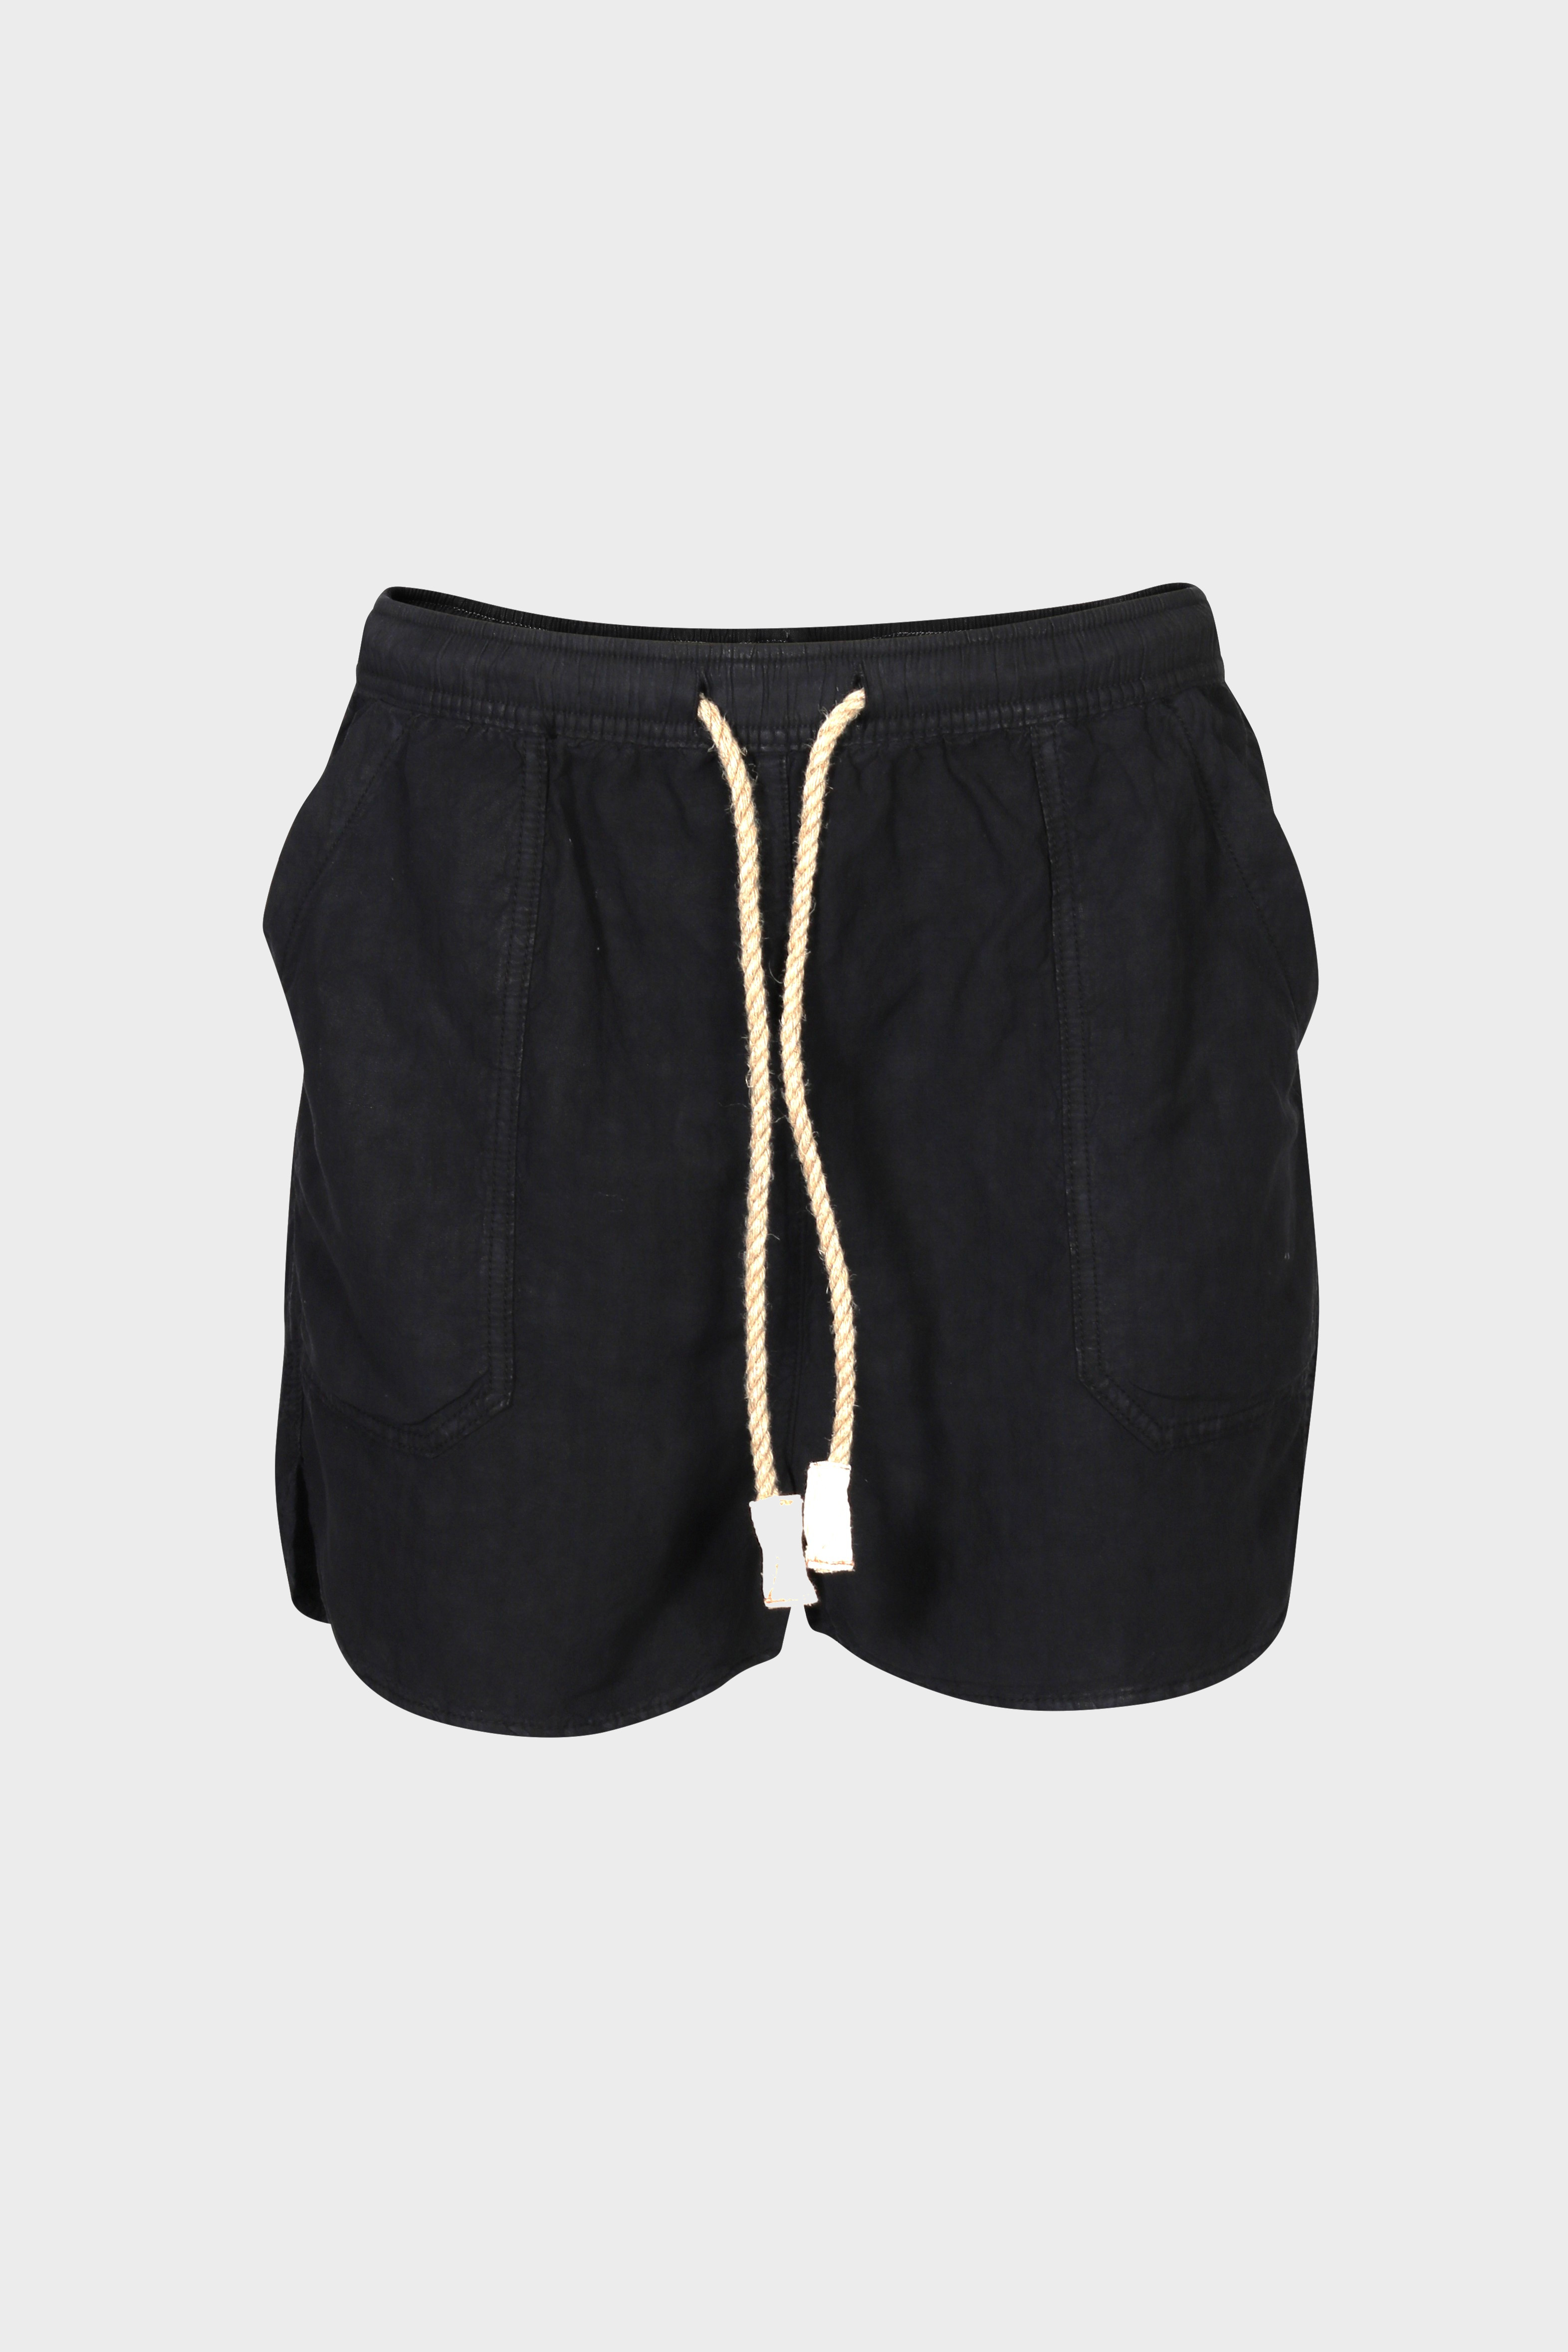 DR. COLLECTORS Weekend Shorts in Black